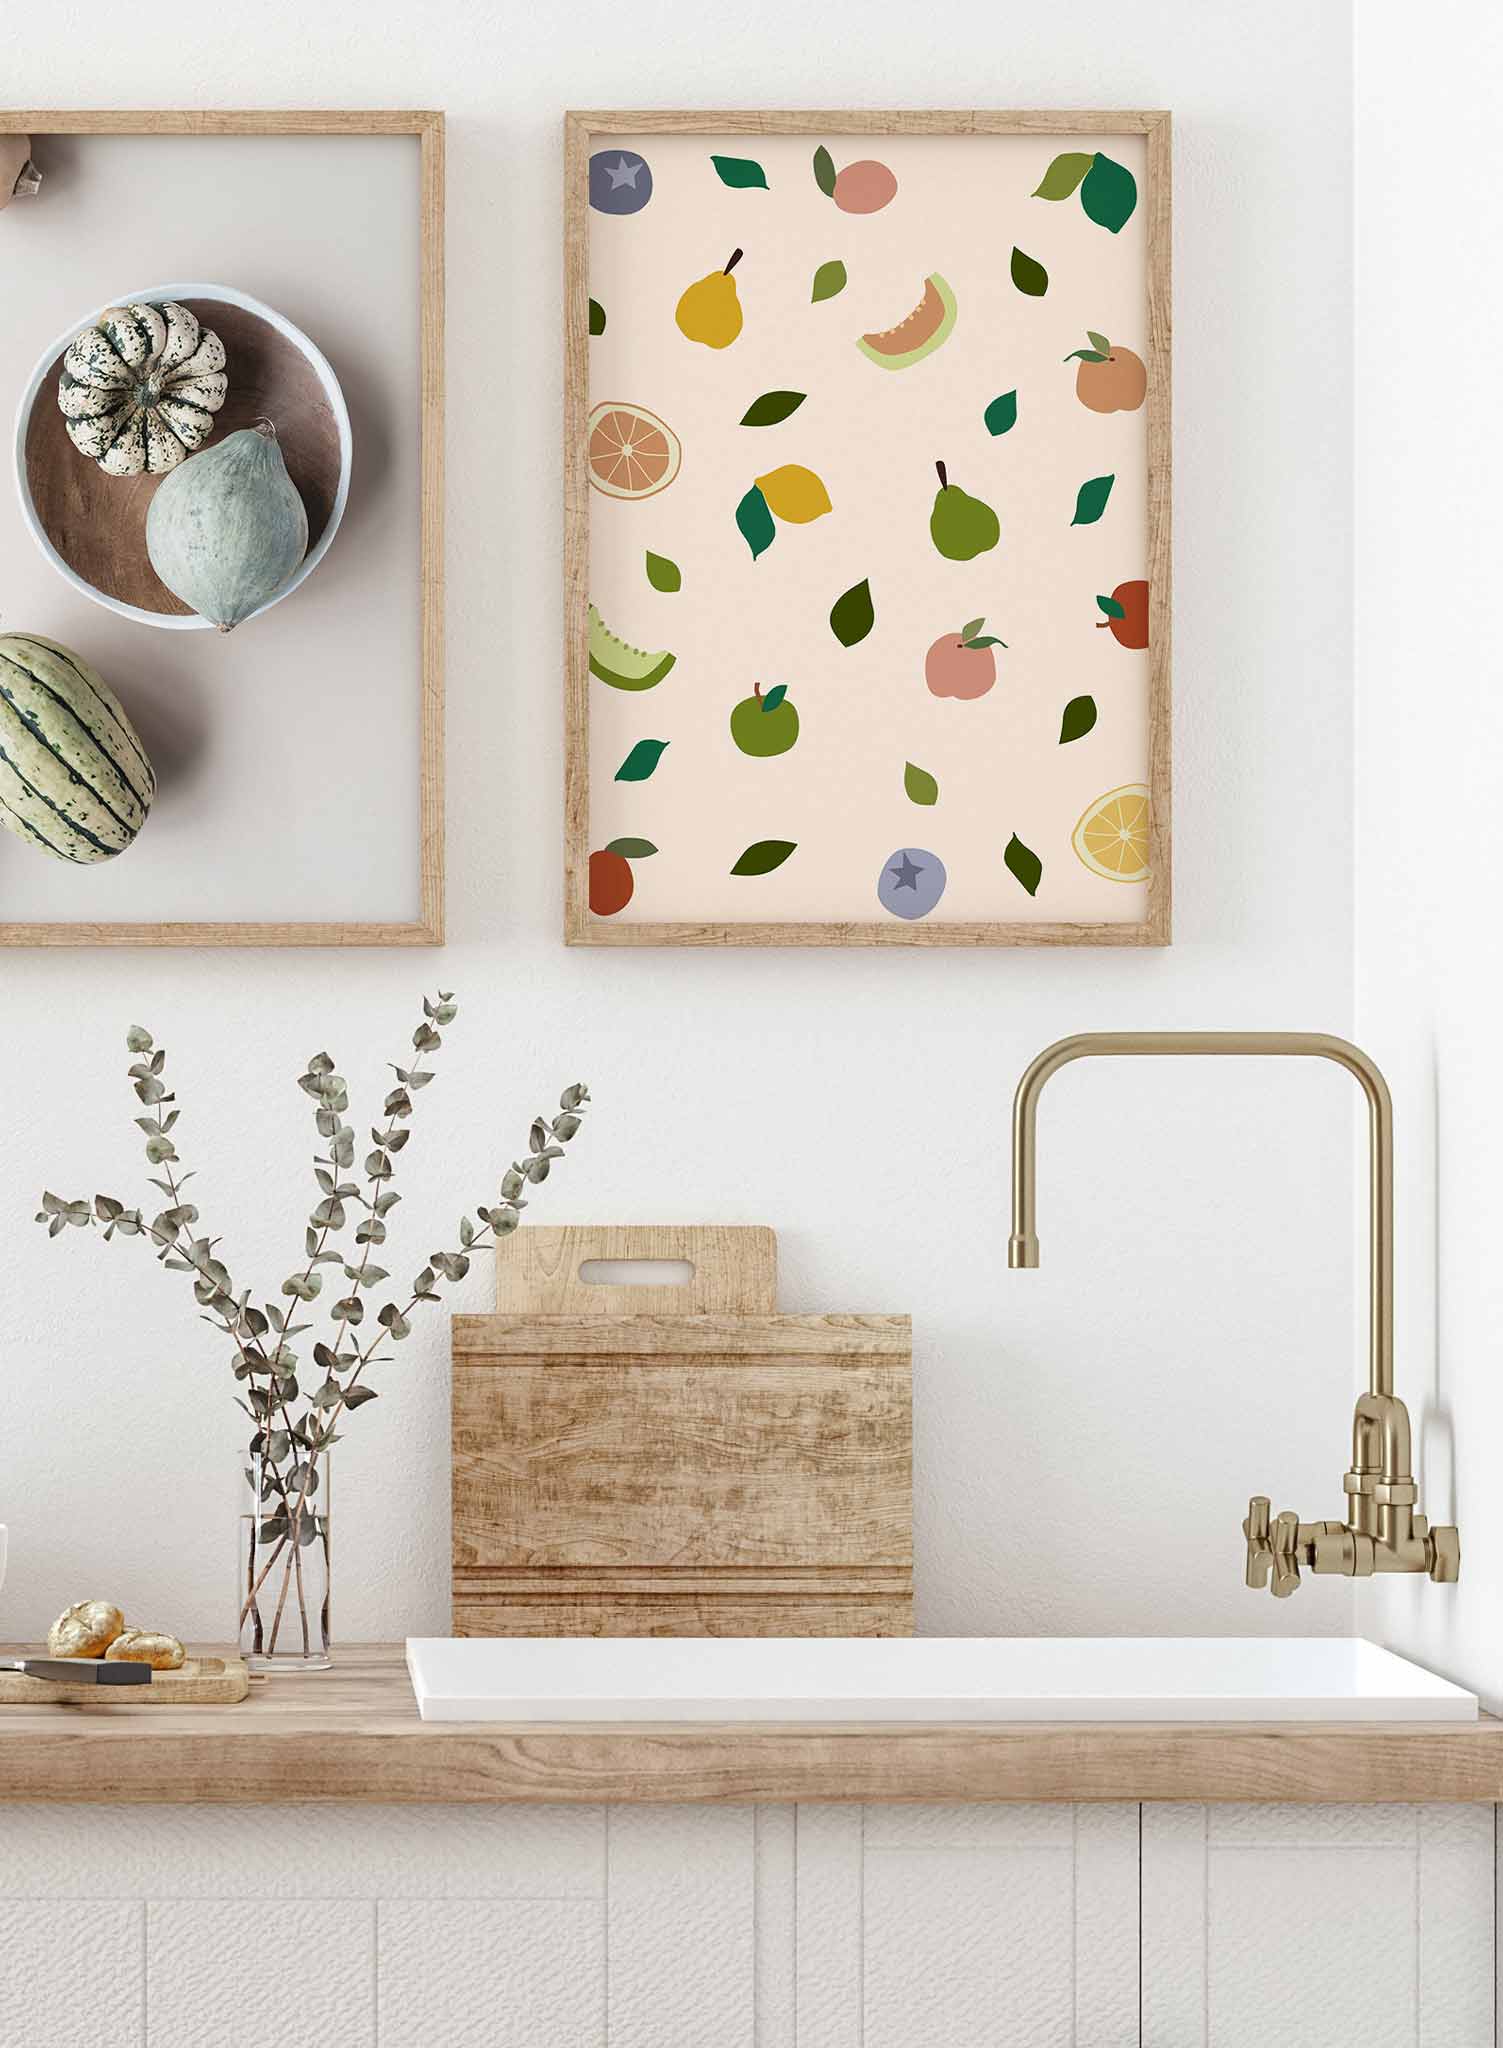 Fruit Explosion is a fruit illustration poster by Opposite Wall.